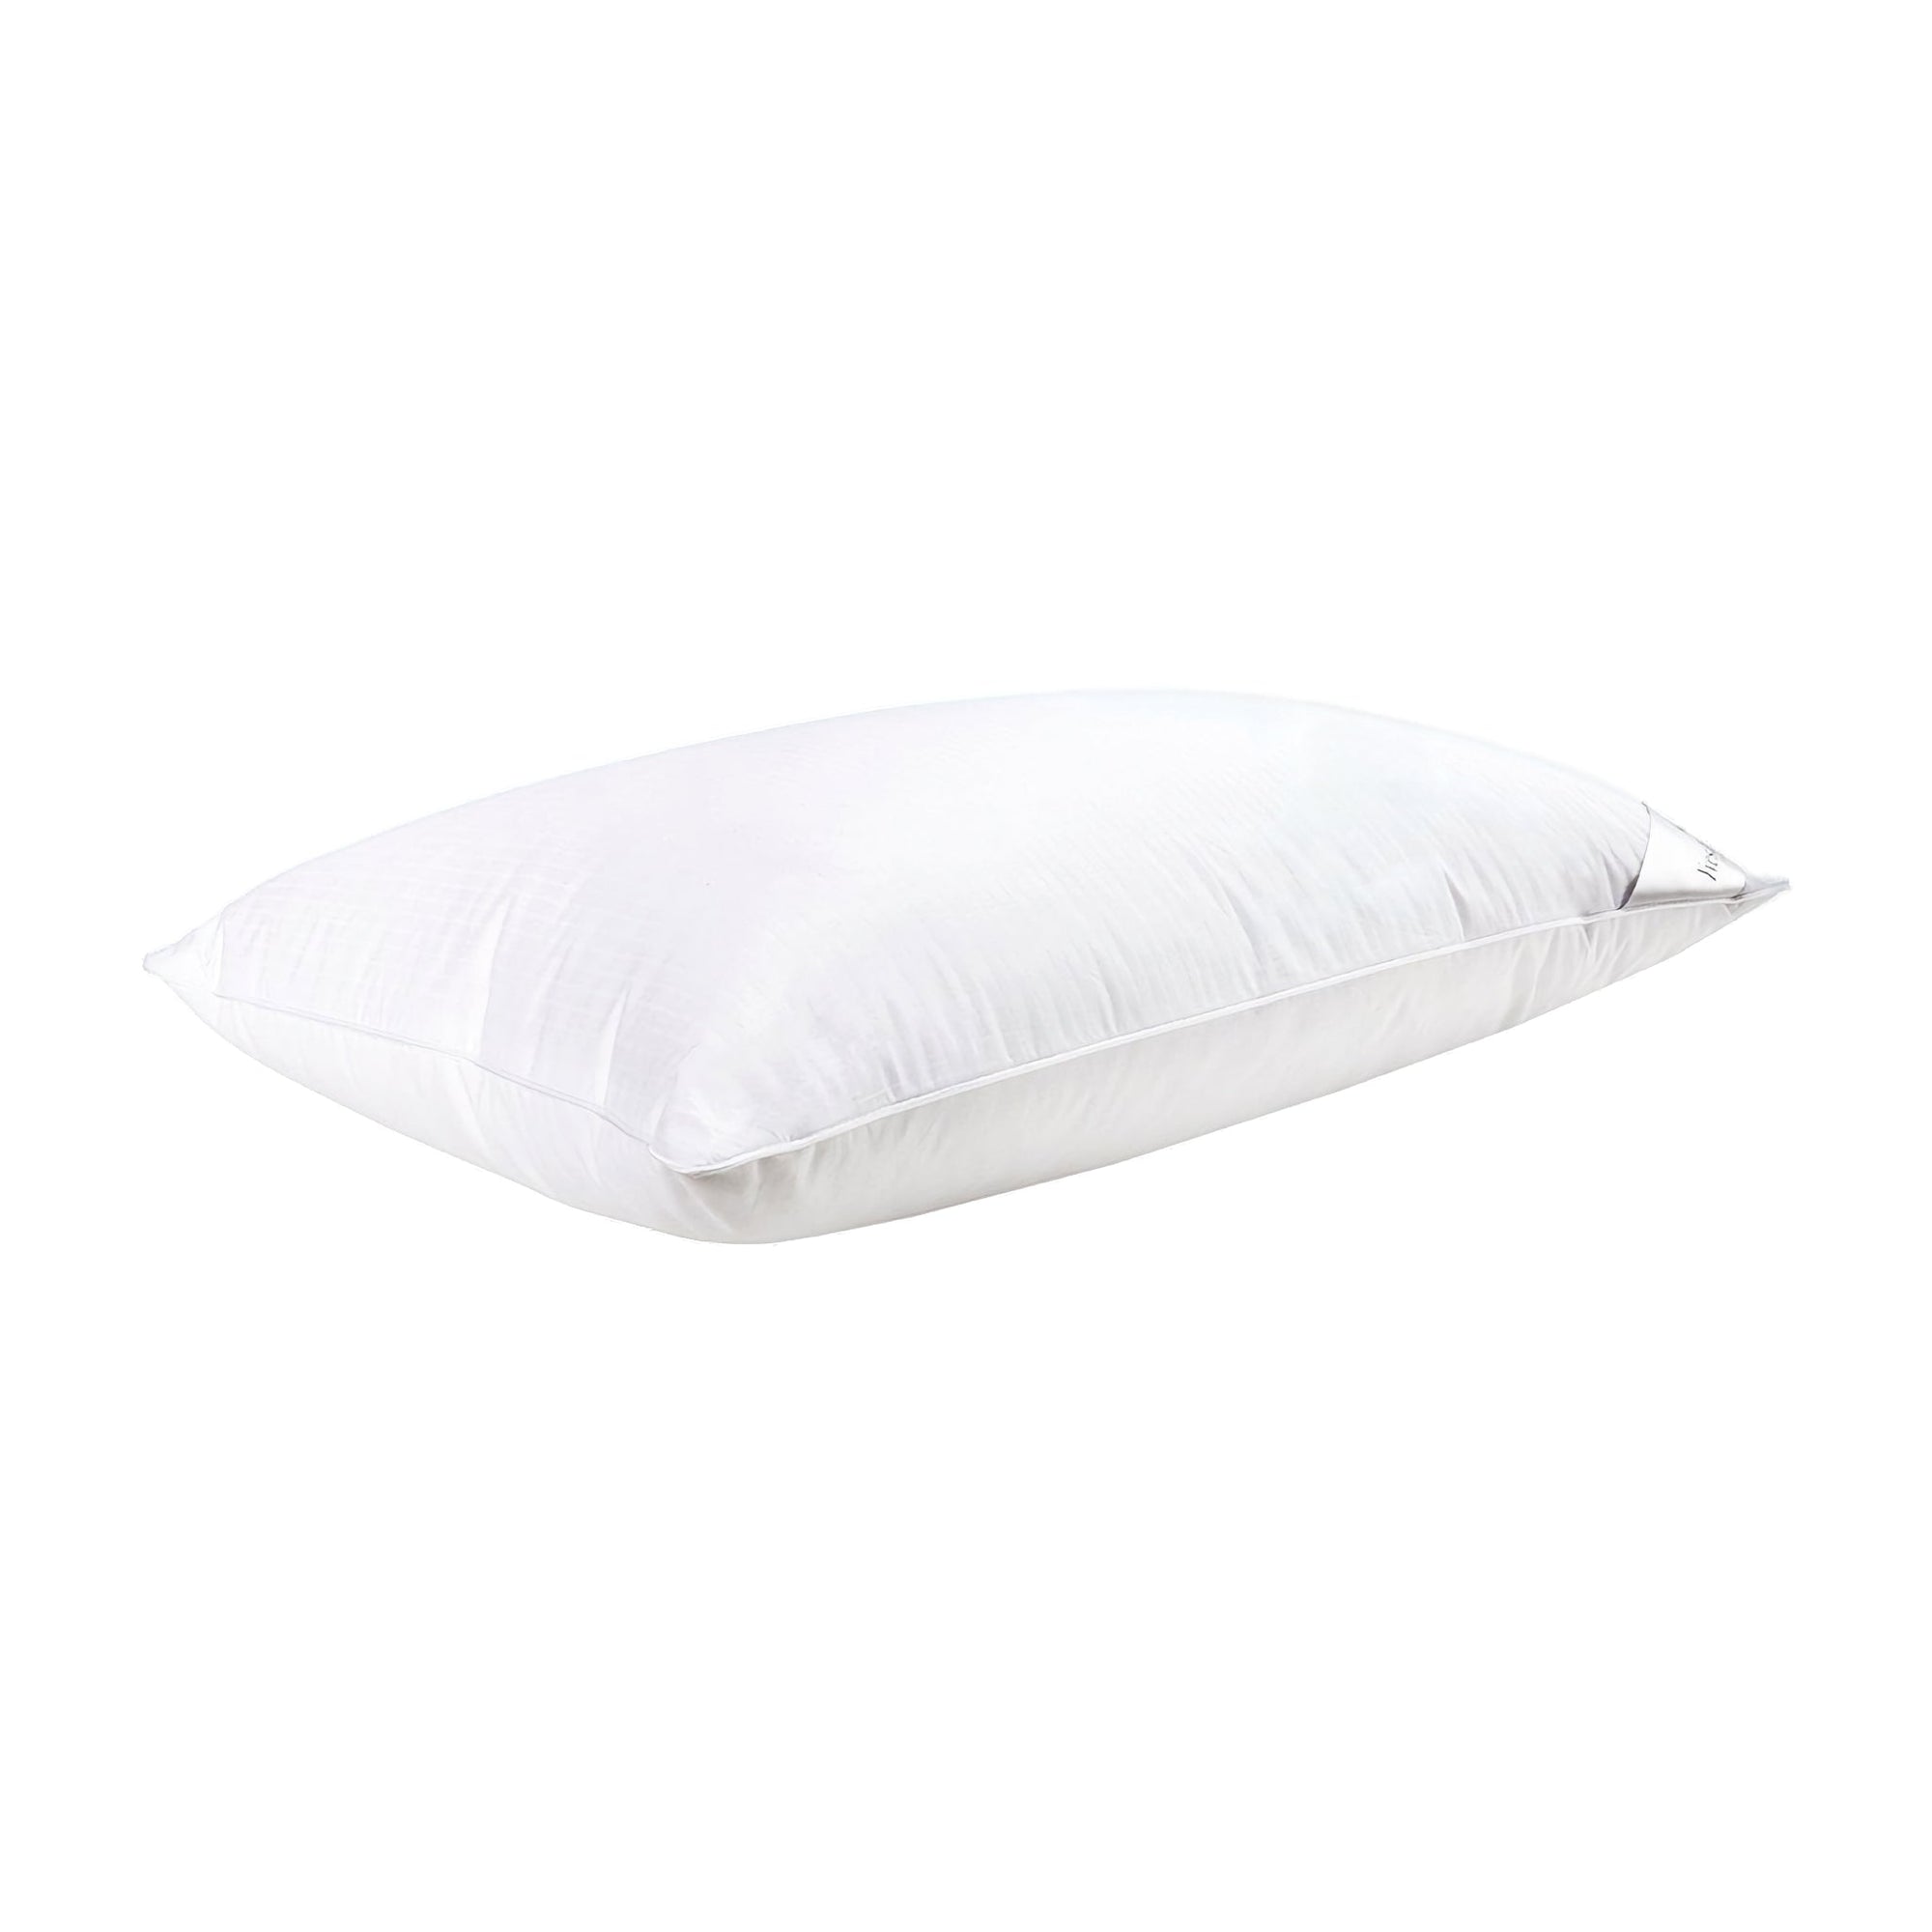 Yves Delorme Down & Feather 3 Chamber Pillows floating against white background